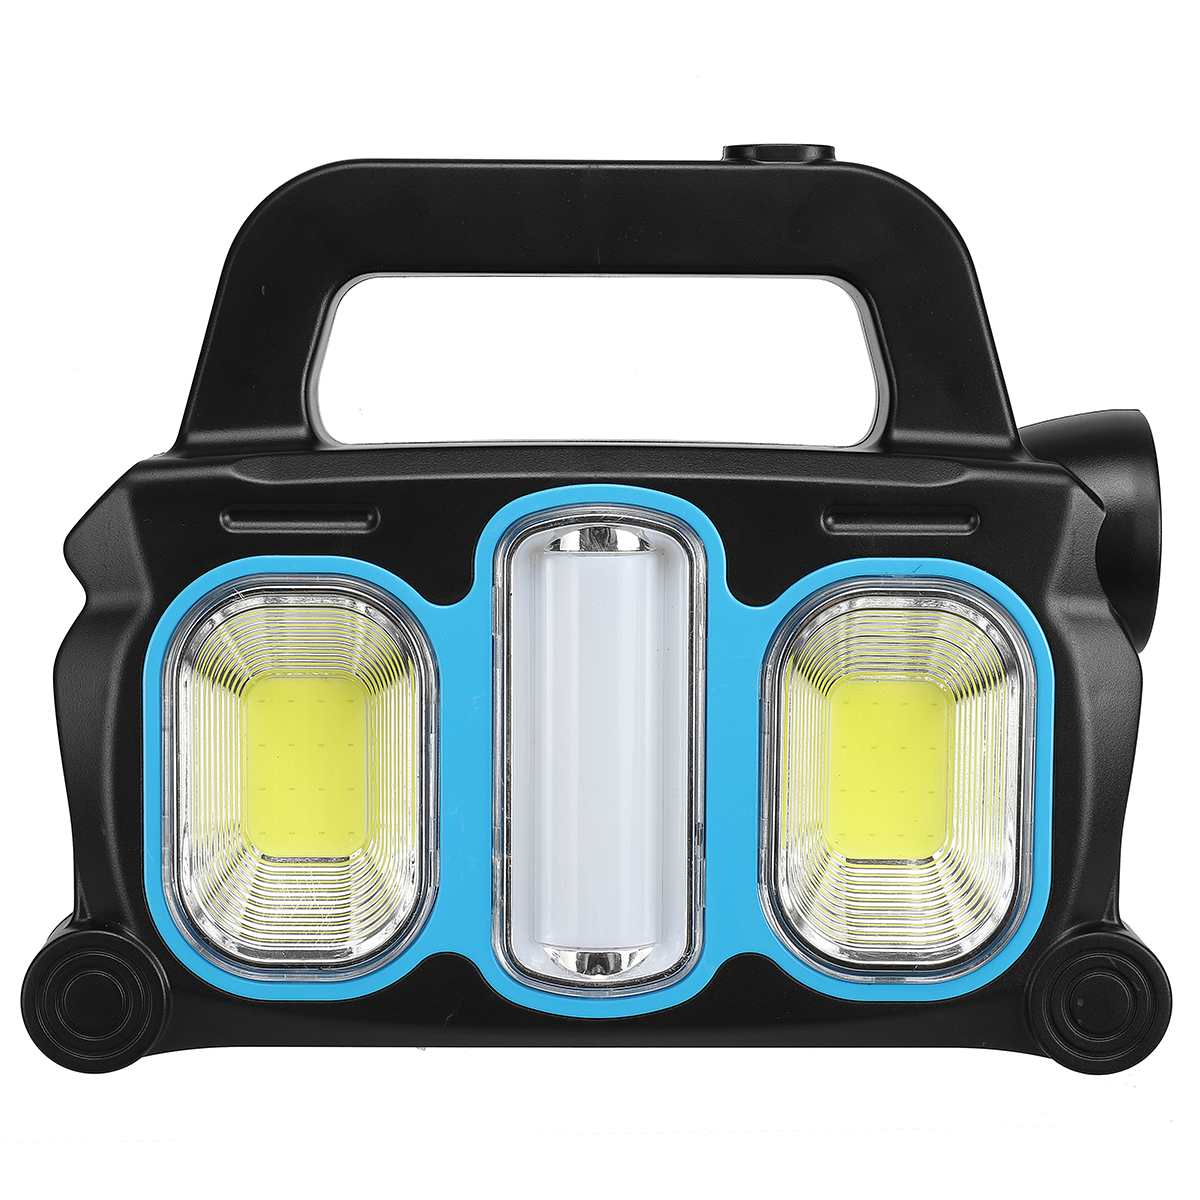 COB-LED-Solar-Work-Lights-IP65-Waterproof-3-Mode-USB-Rechargeable-Portable-Floodlight-Lamps-Outdoor--1924944-6